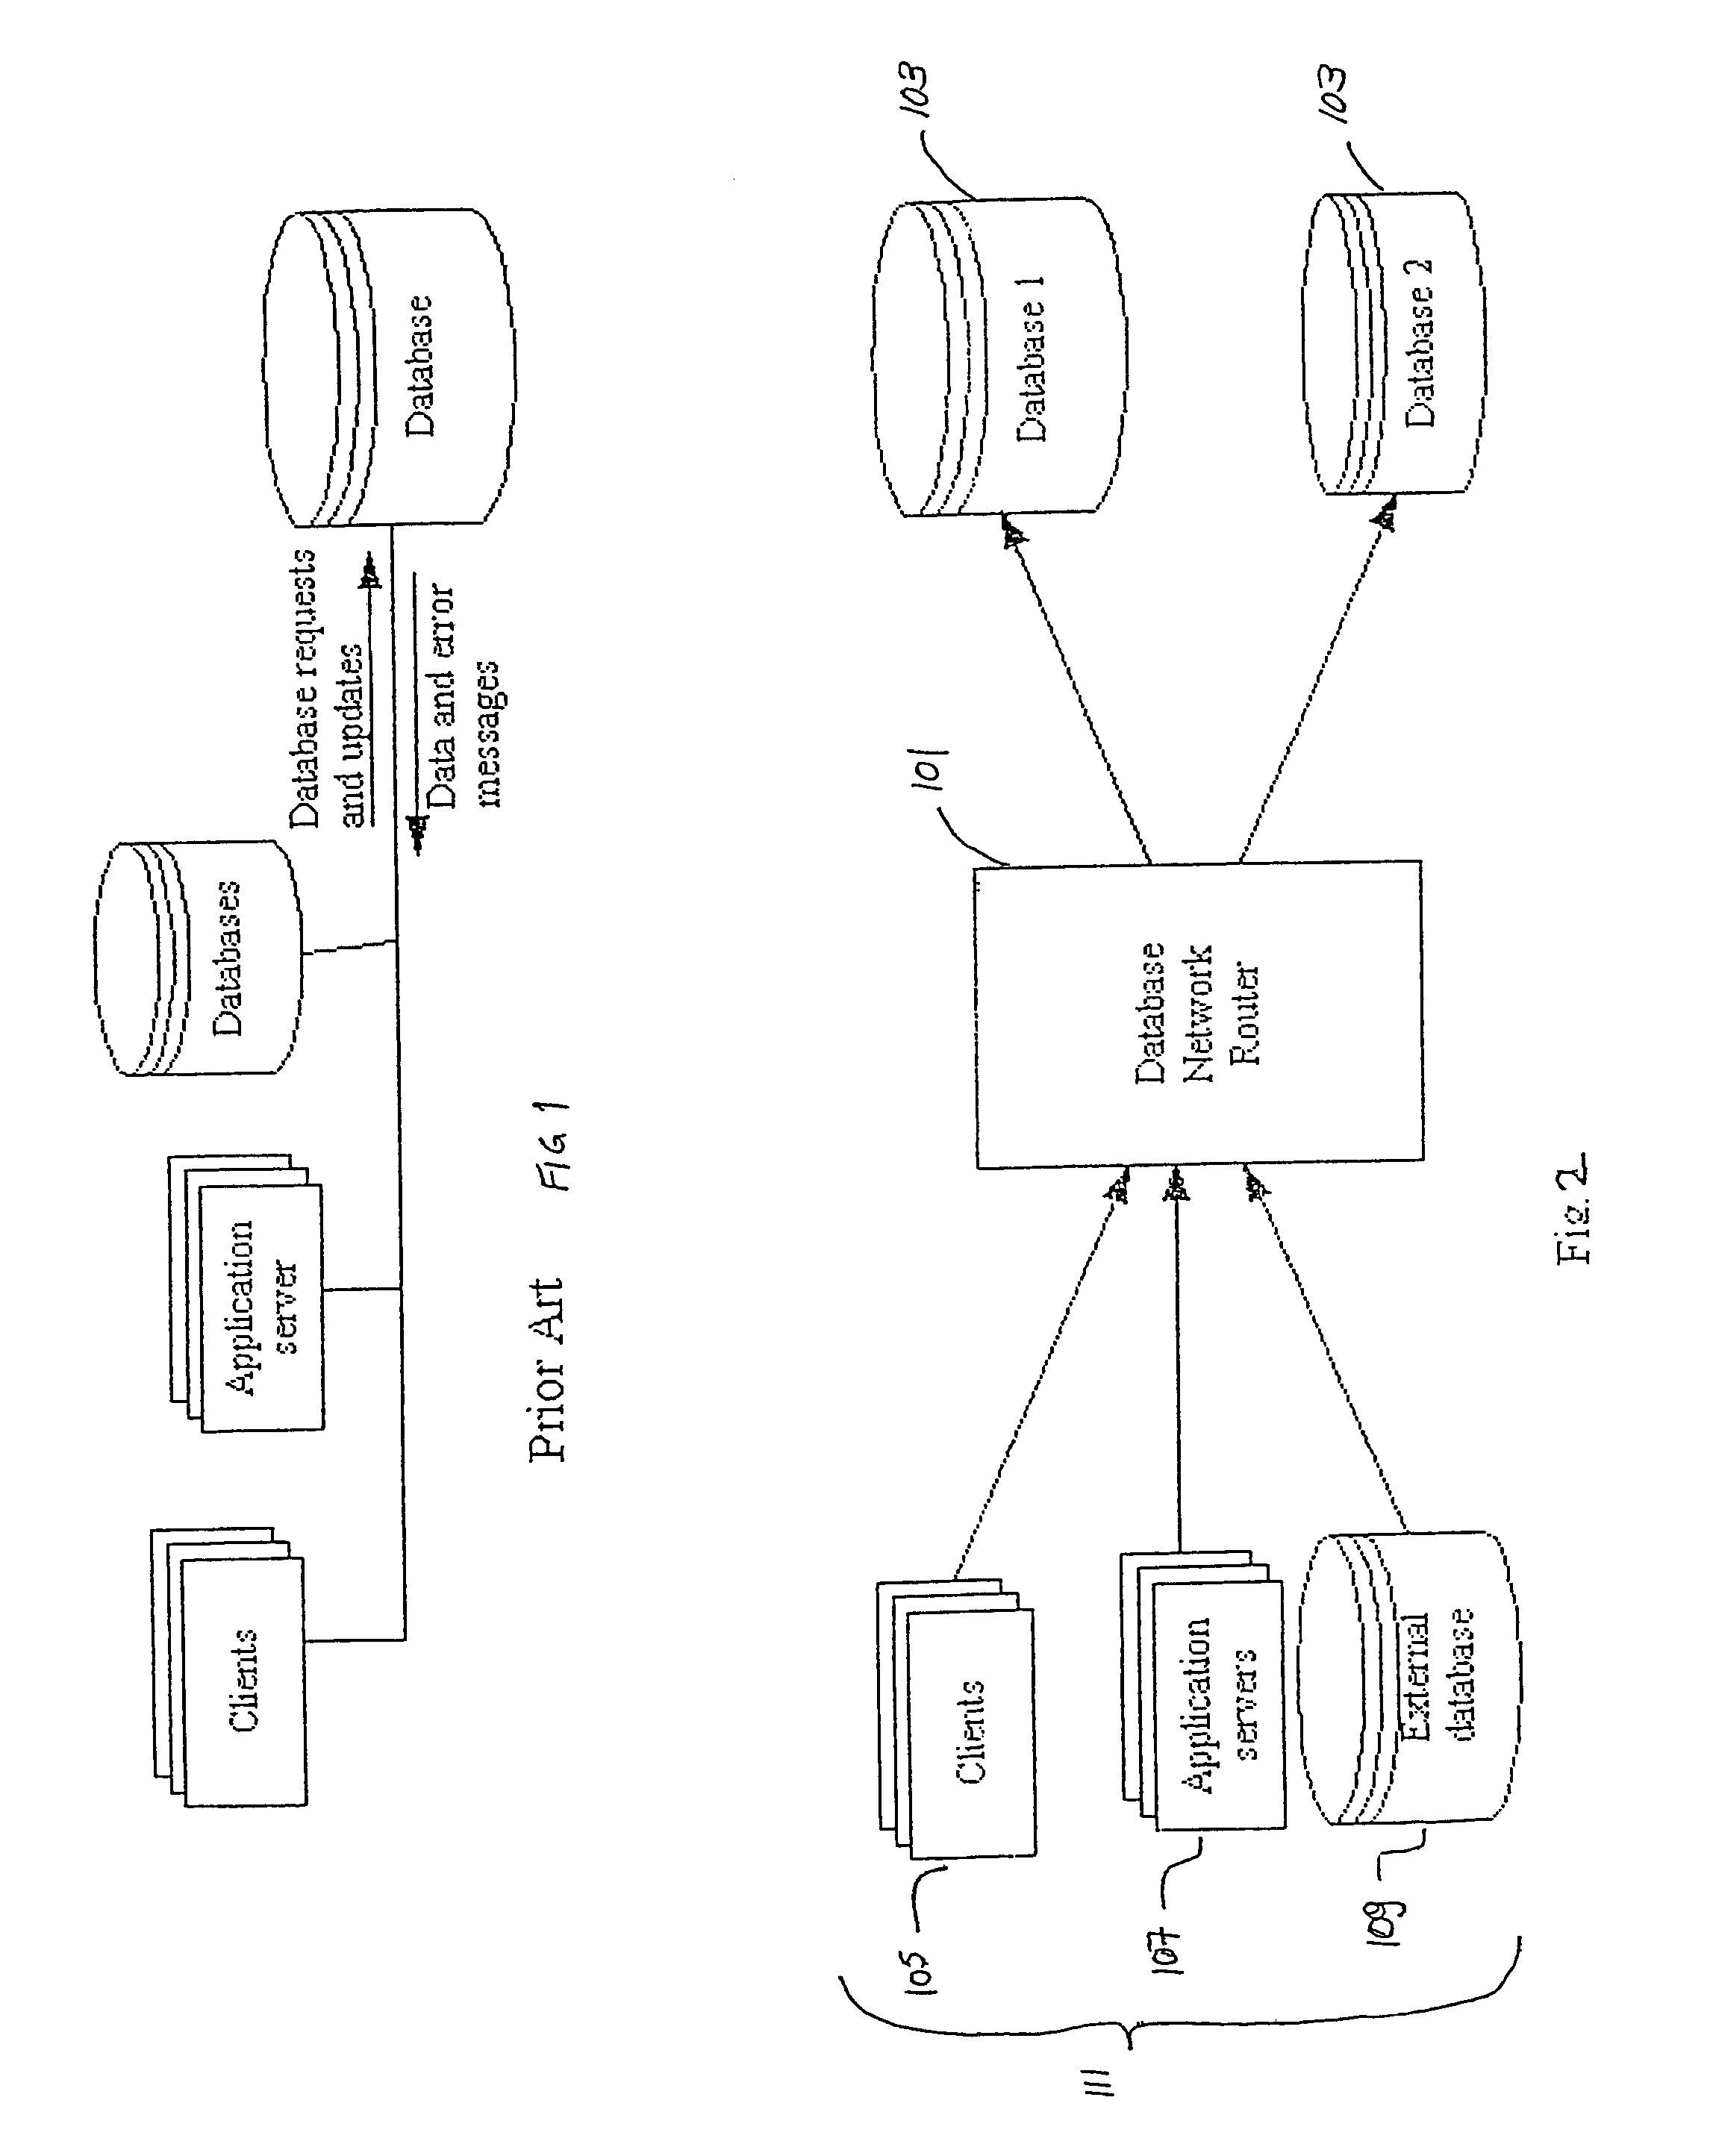 System and method for the optimization of database access in data base networks